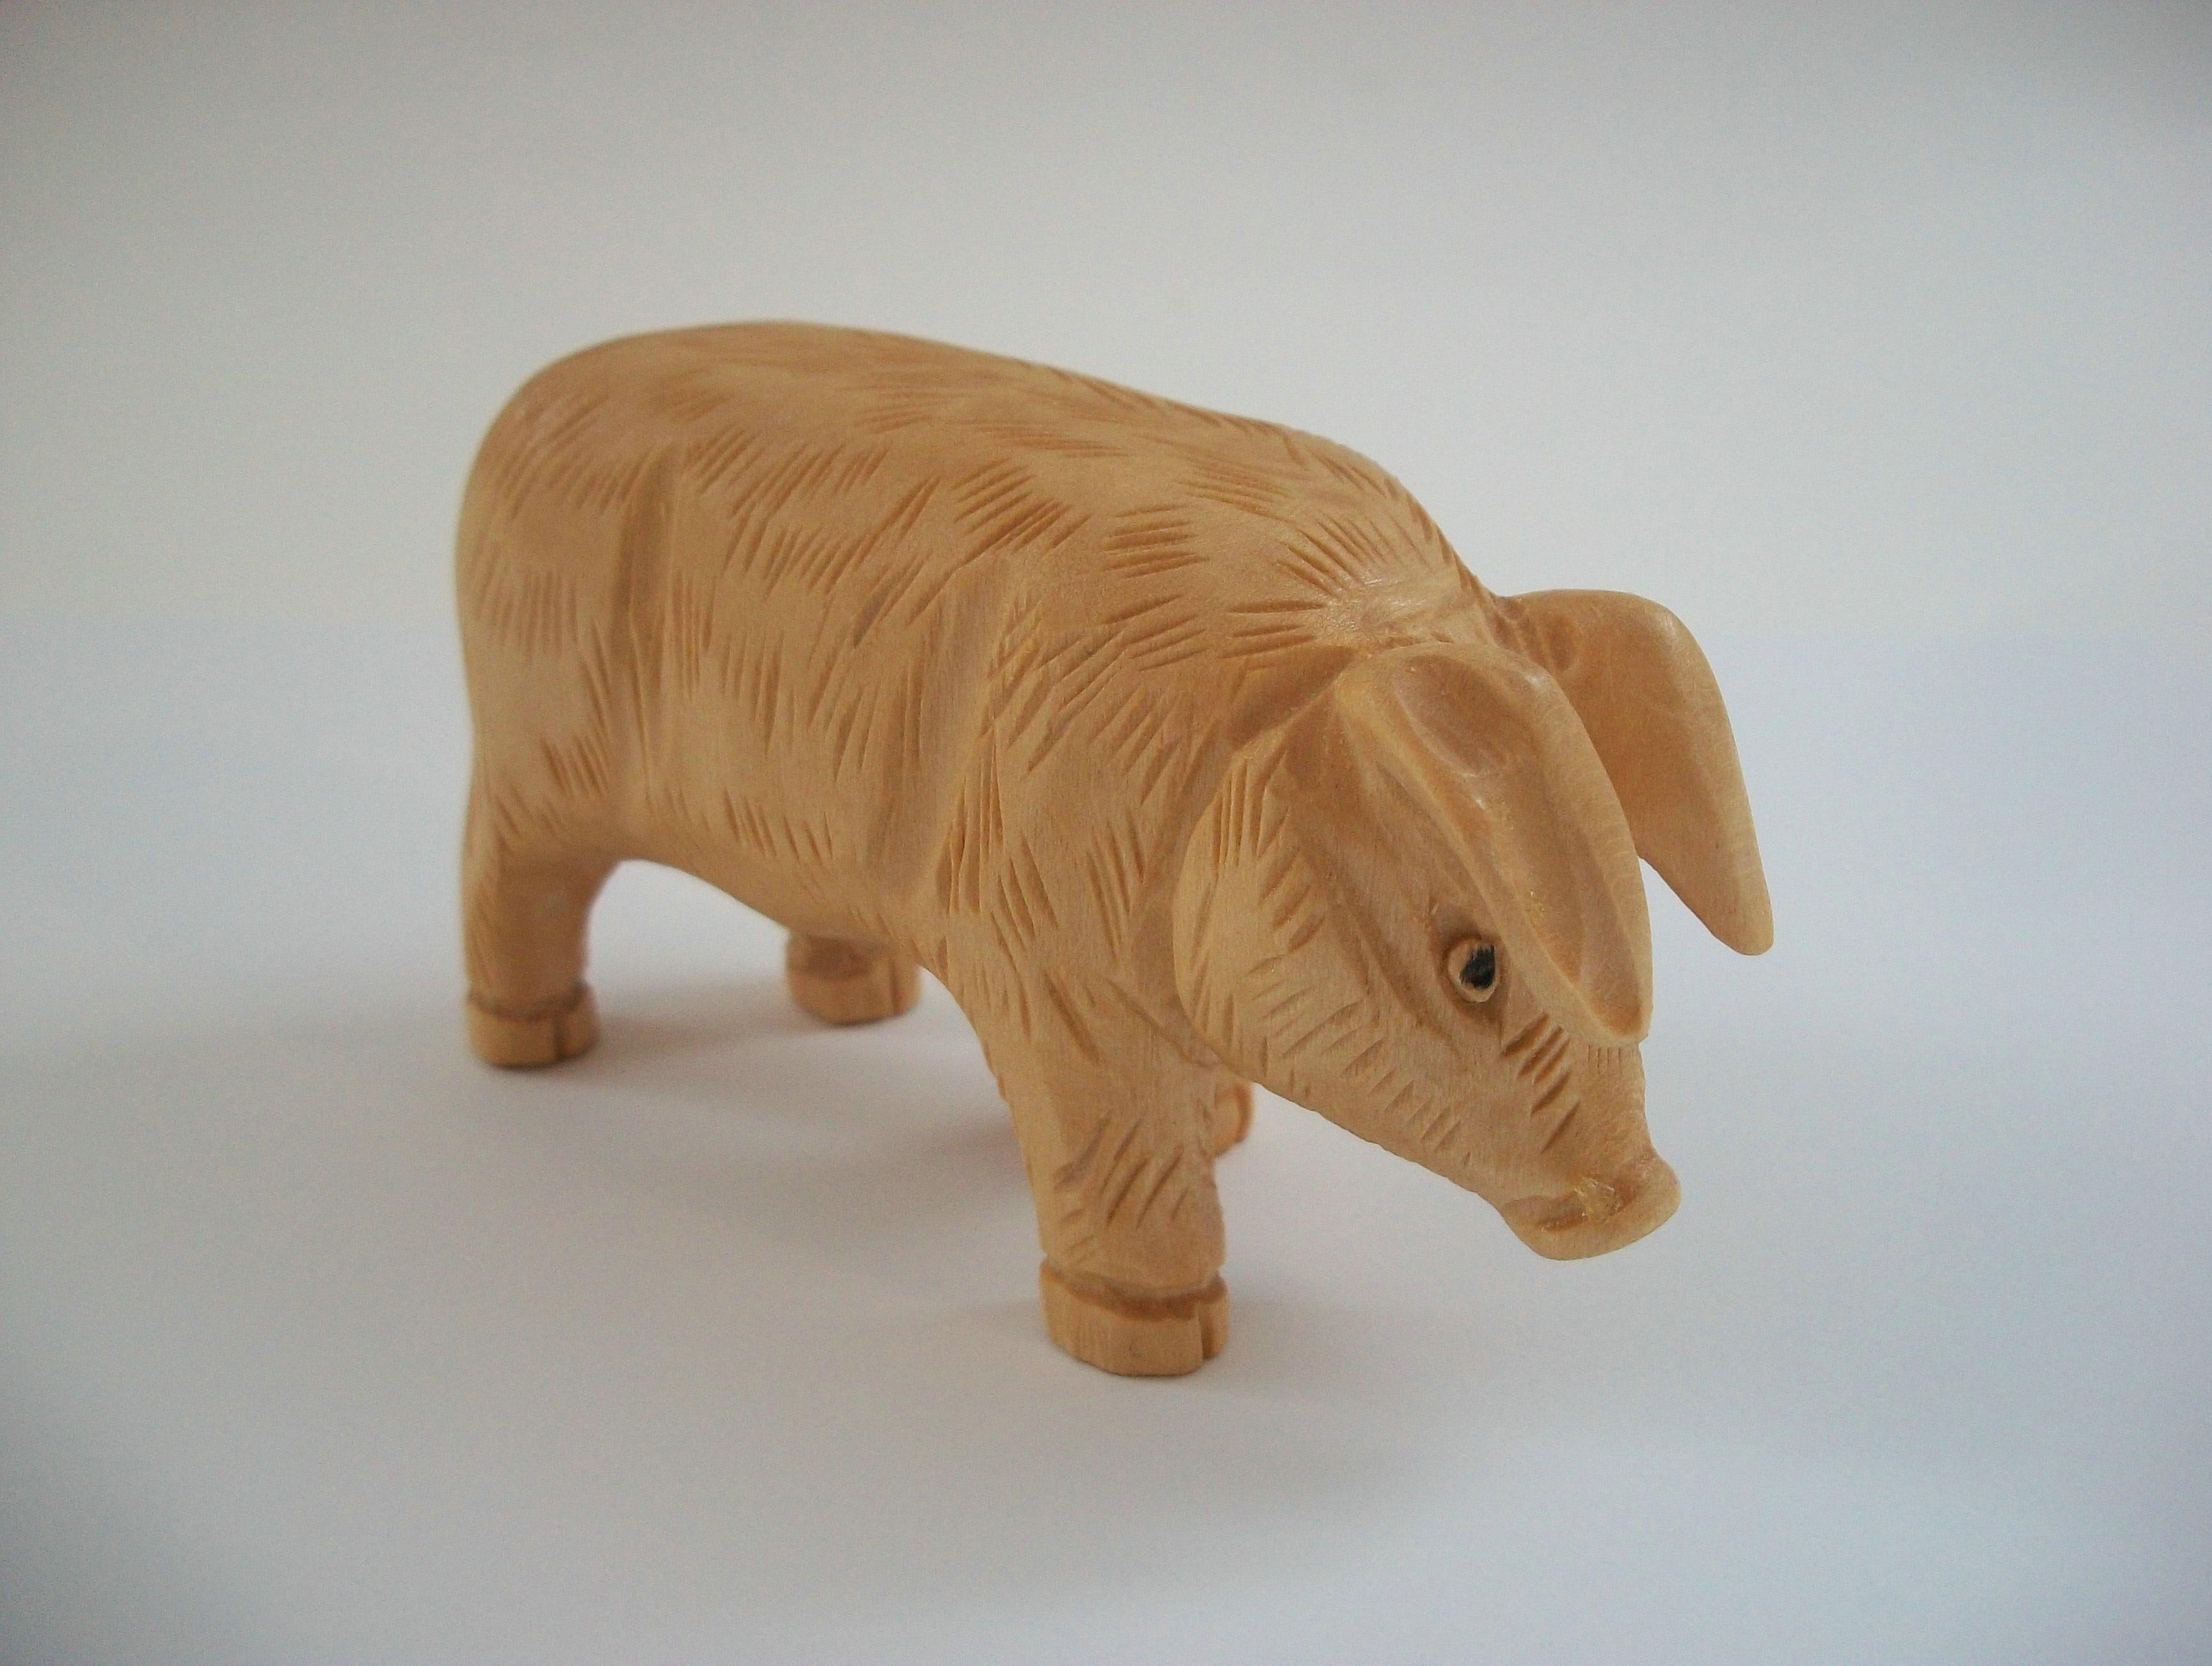 Canadian NOËL GUAY - Vintage Folk Art Pine Pig Sculpture - Canada - Late 20th Century For Sale